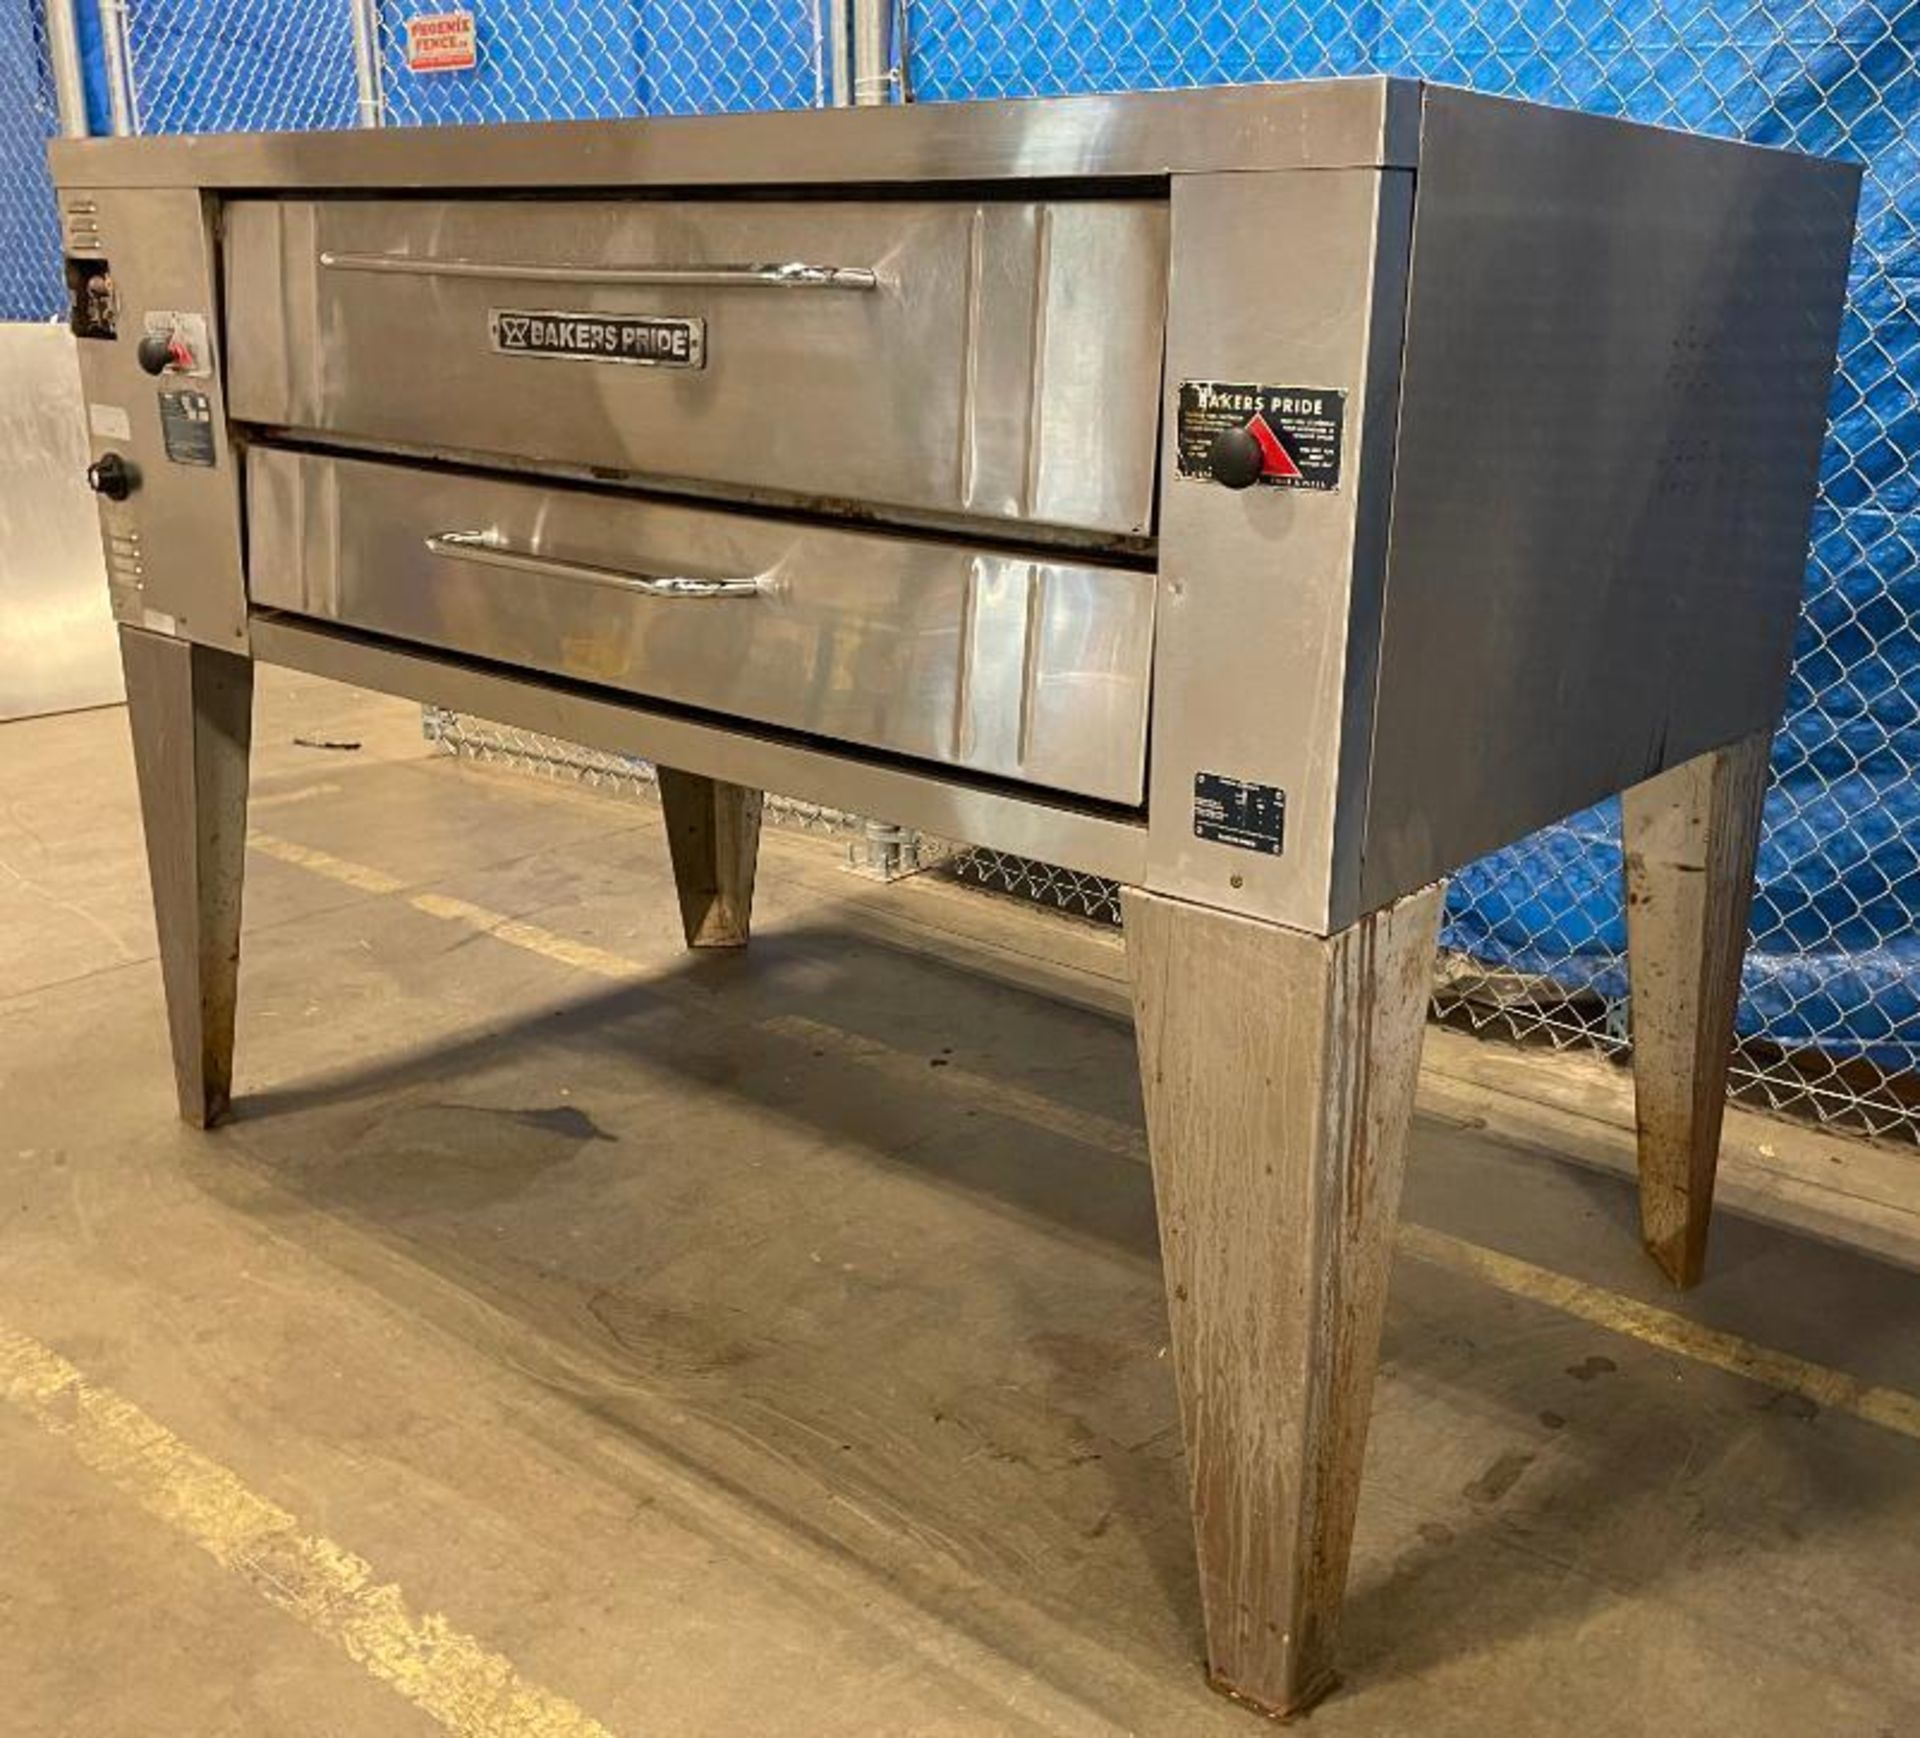 BAKERS PRIDE Y-600 GAS SINGLE DECK PIZZA OVEN - Image 4 of 17